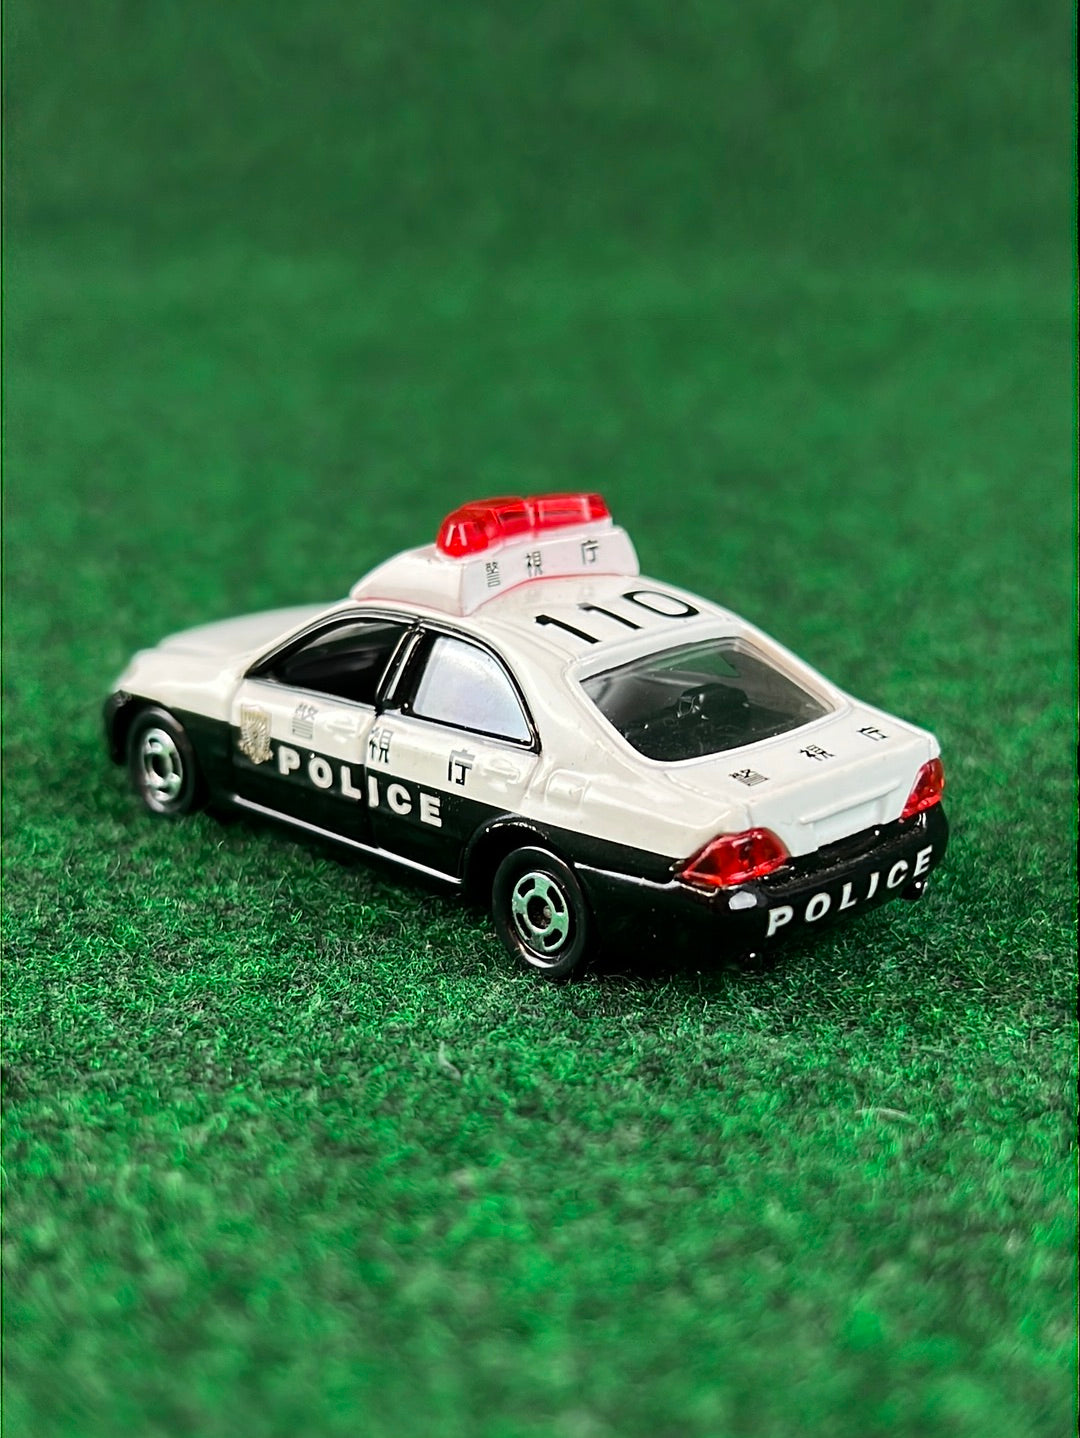 TOMICA Cargo Delivery Van and Toyota Crown Japanese Police Toy Car Set